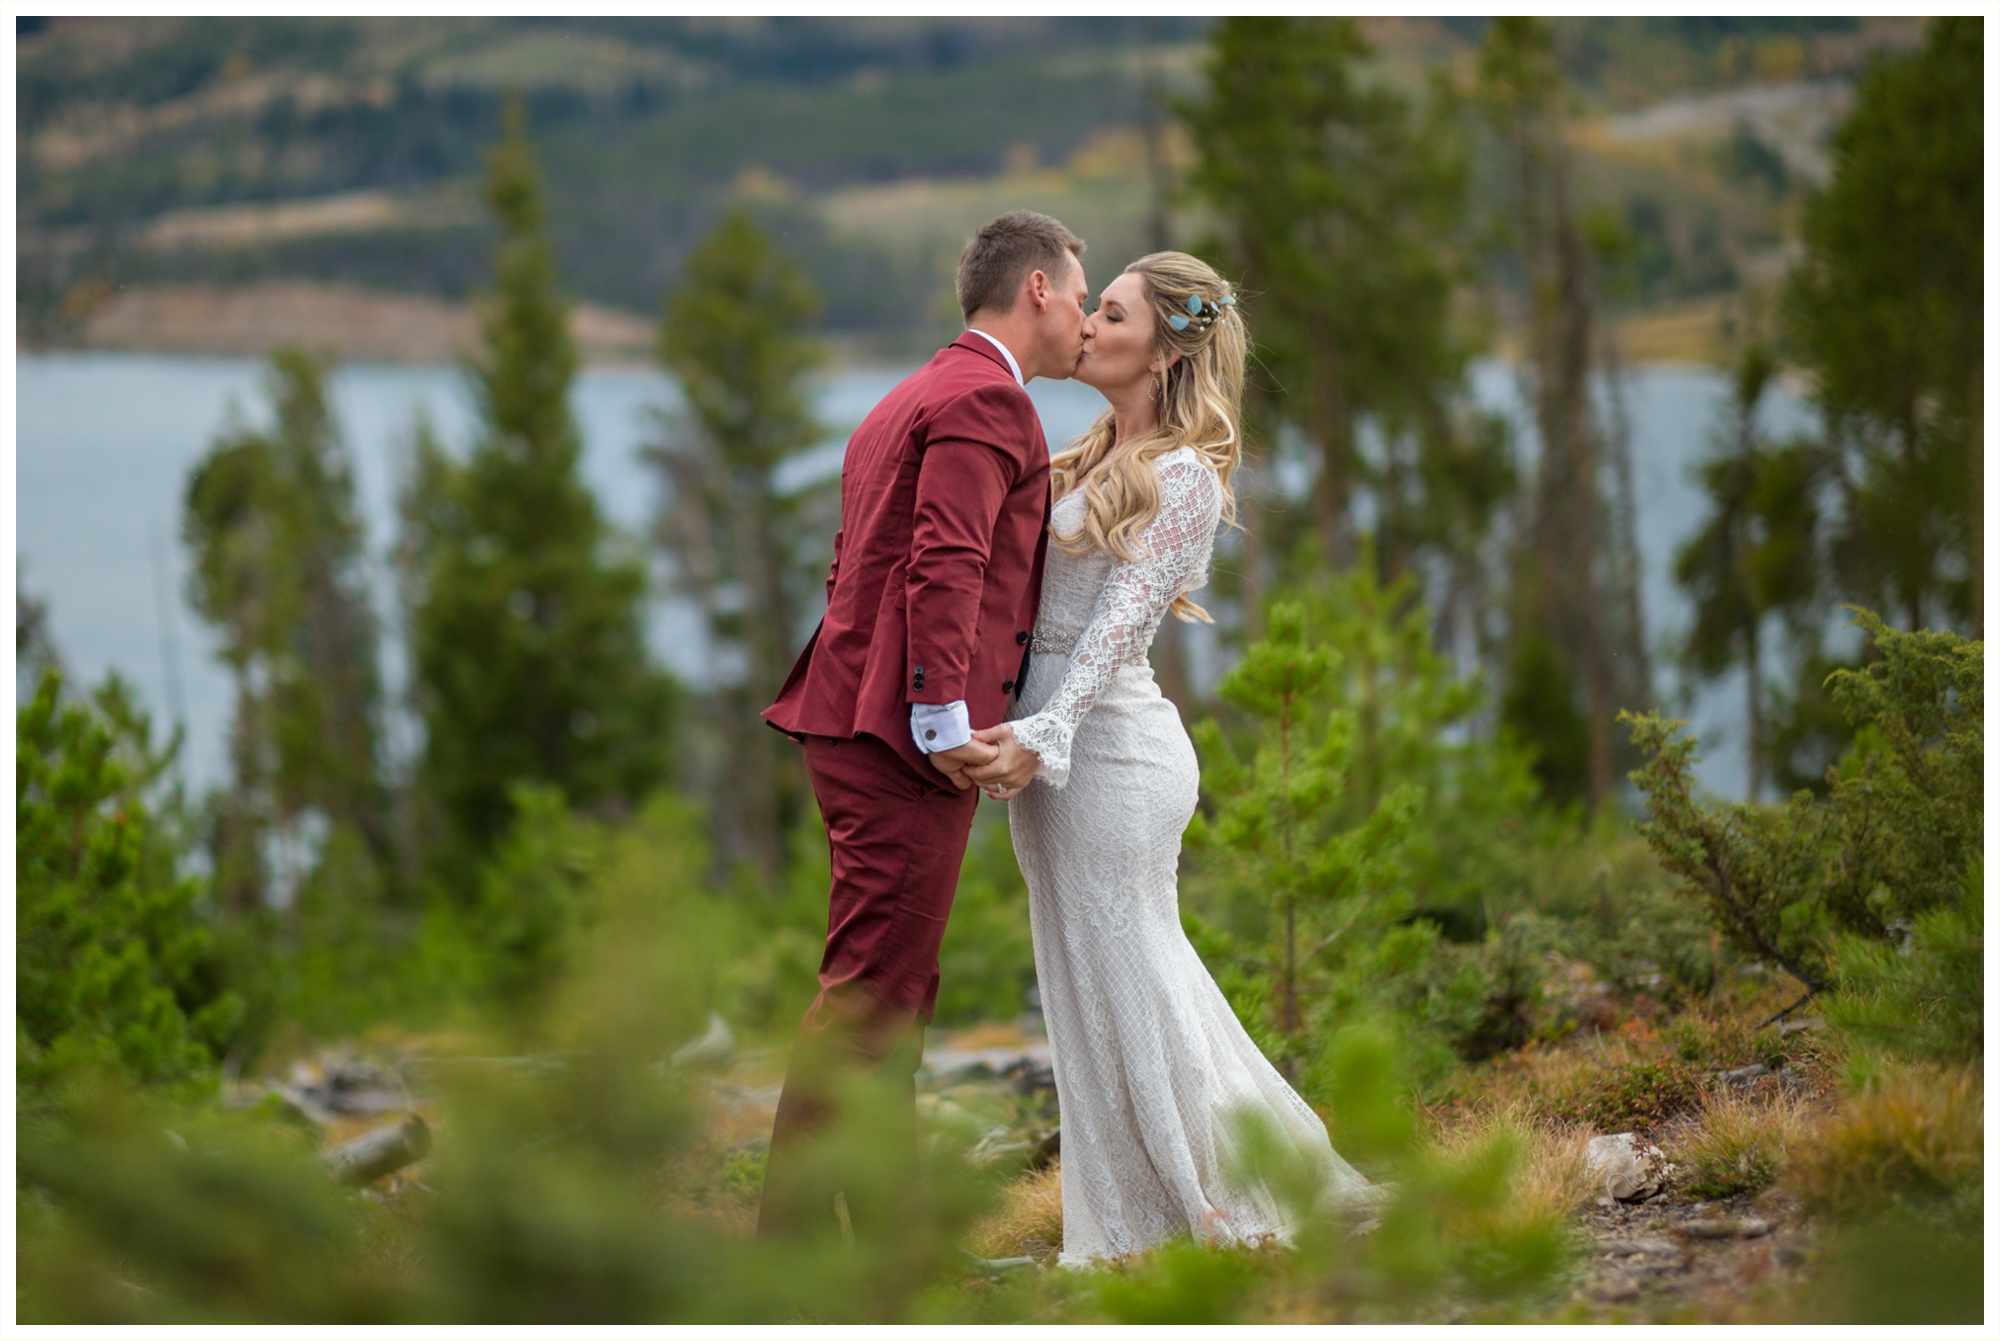 fashionable bride groom portraits at sapphire point groom wears maroon suit bride long sleeved lace dress kissing